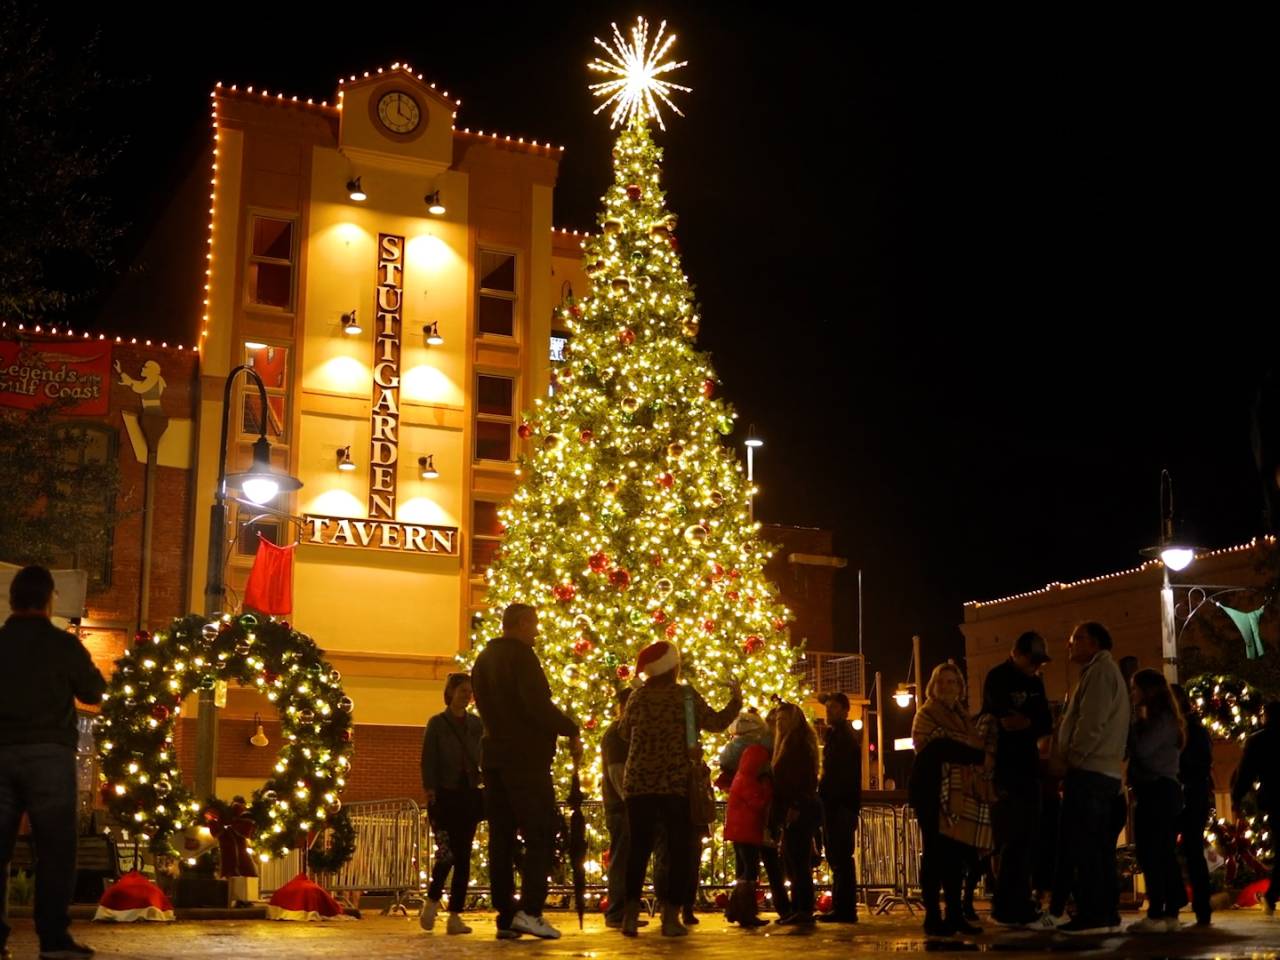 people gather around an illuminated christmas tree and holiday wreath in Downtown Galveston